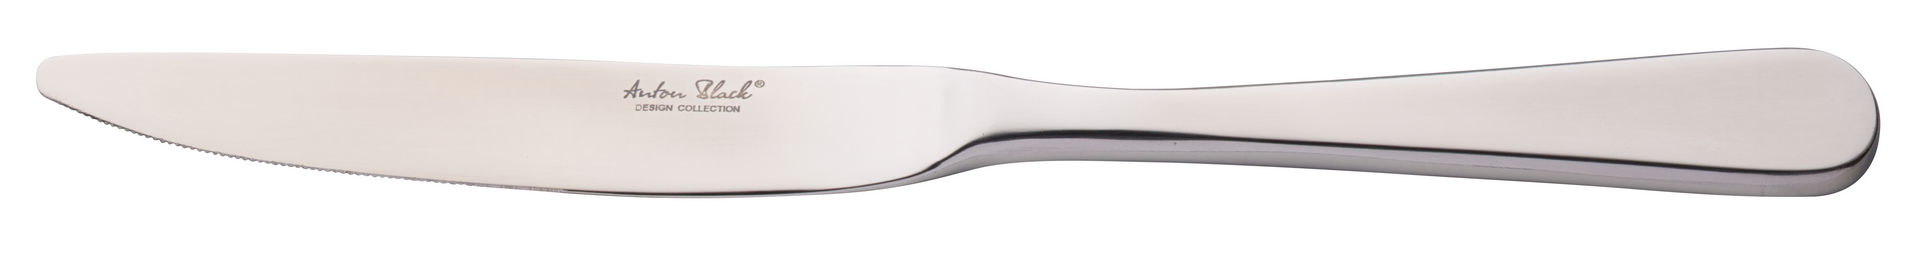 Icon Table Knife - F10905-000000-B01012 (Pack of 12)